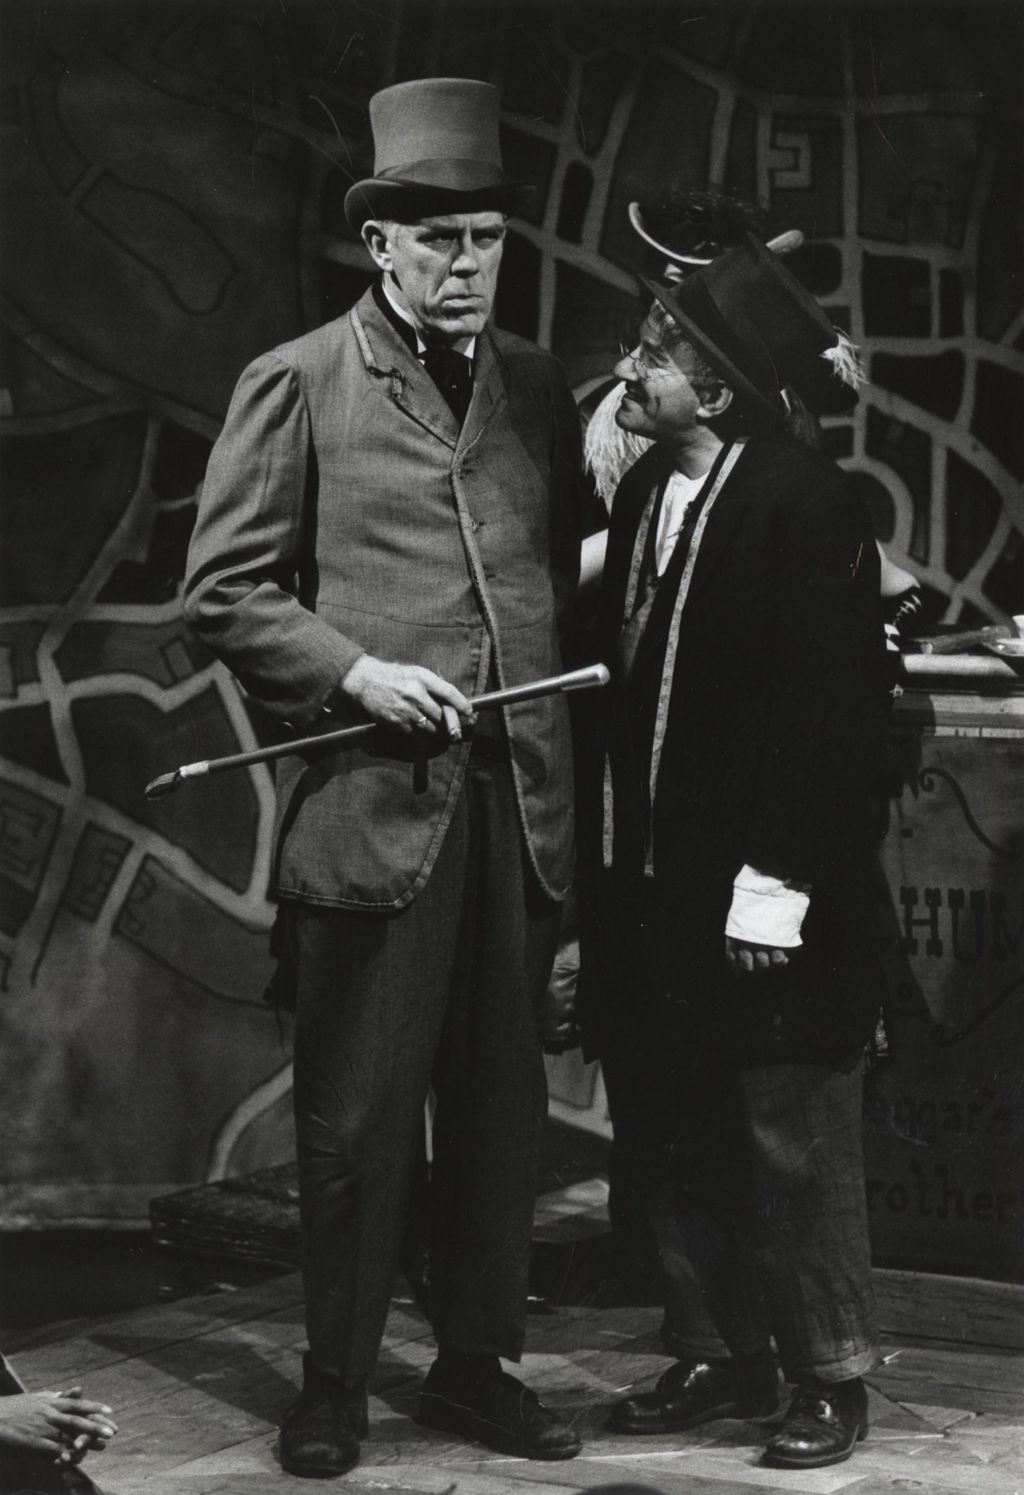 Tom Kelly and Franklyn Alexander on stage in a production of "The Threepenny Opera" at Hull-House Theater